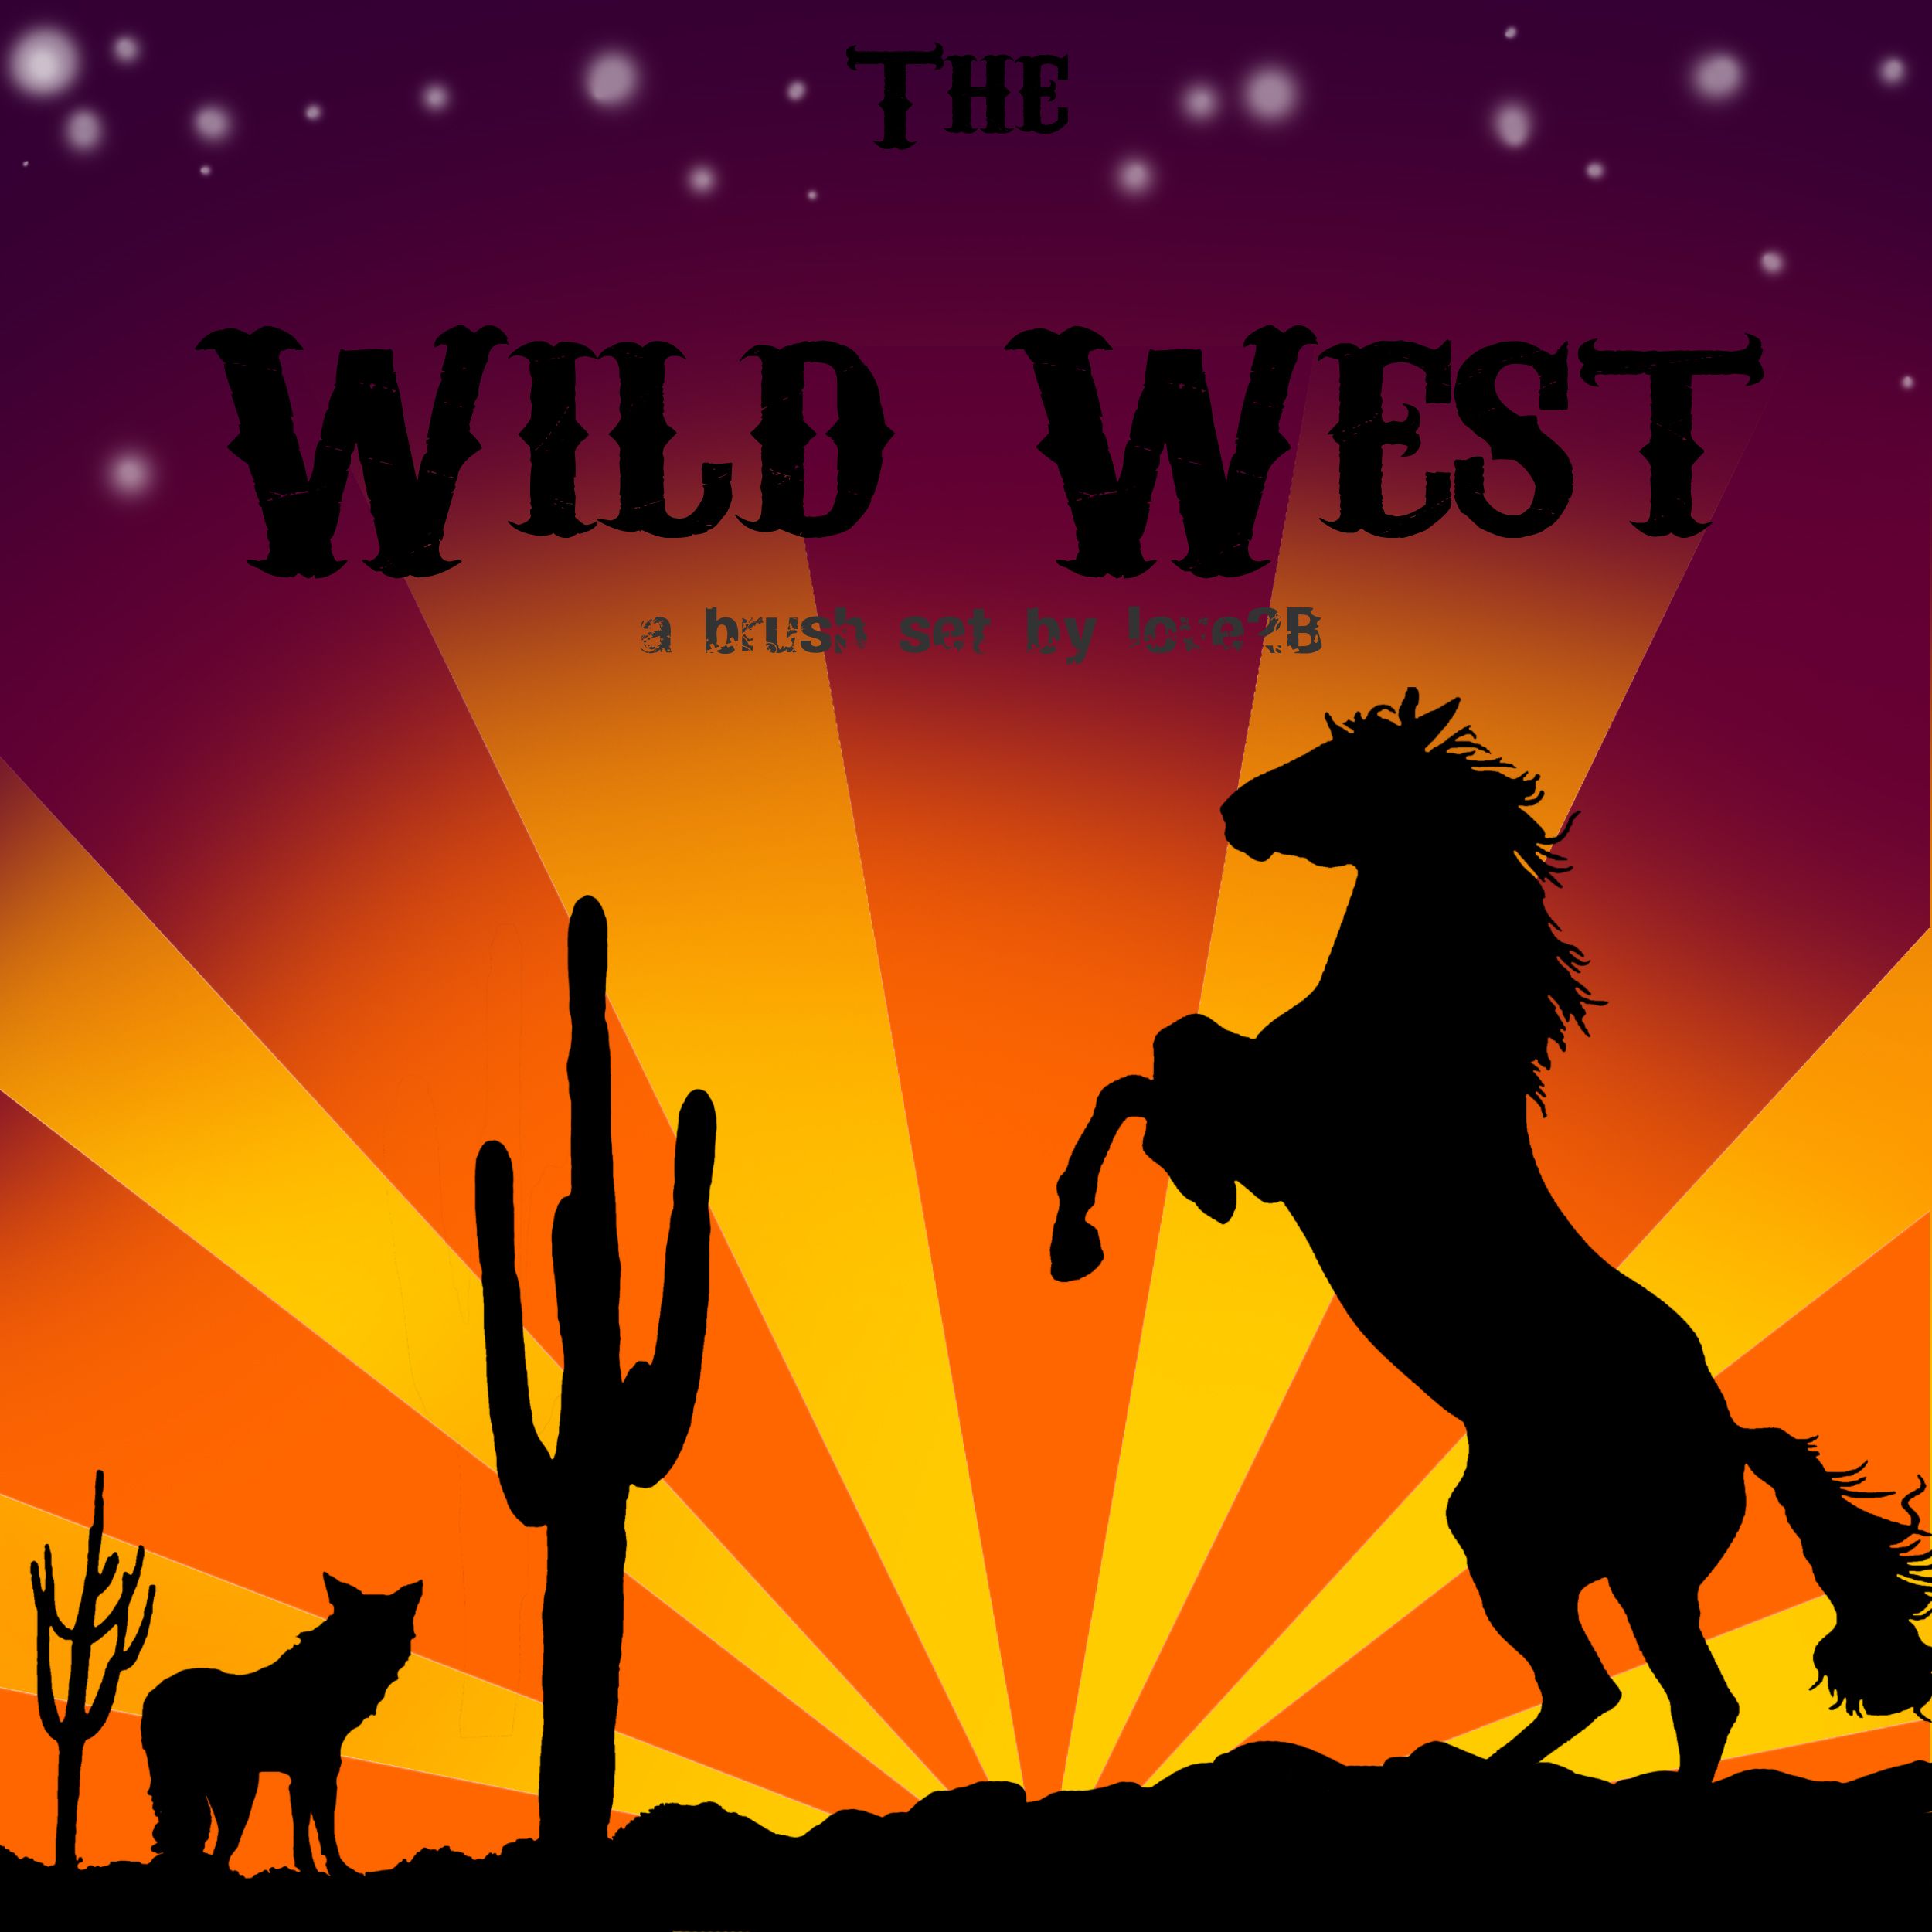 DeviantArt More Like wild west brushes by Love2B